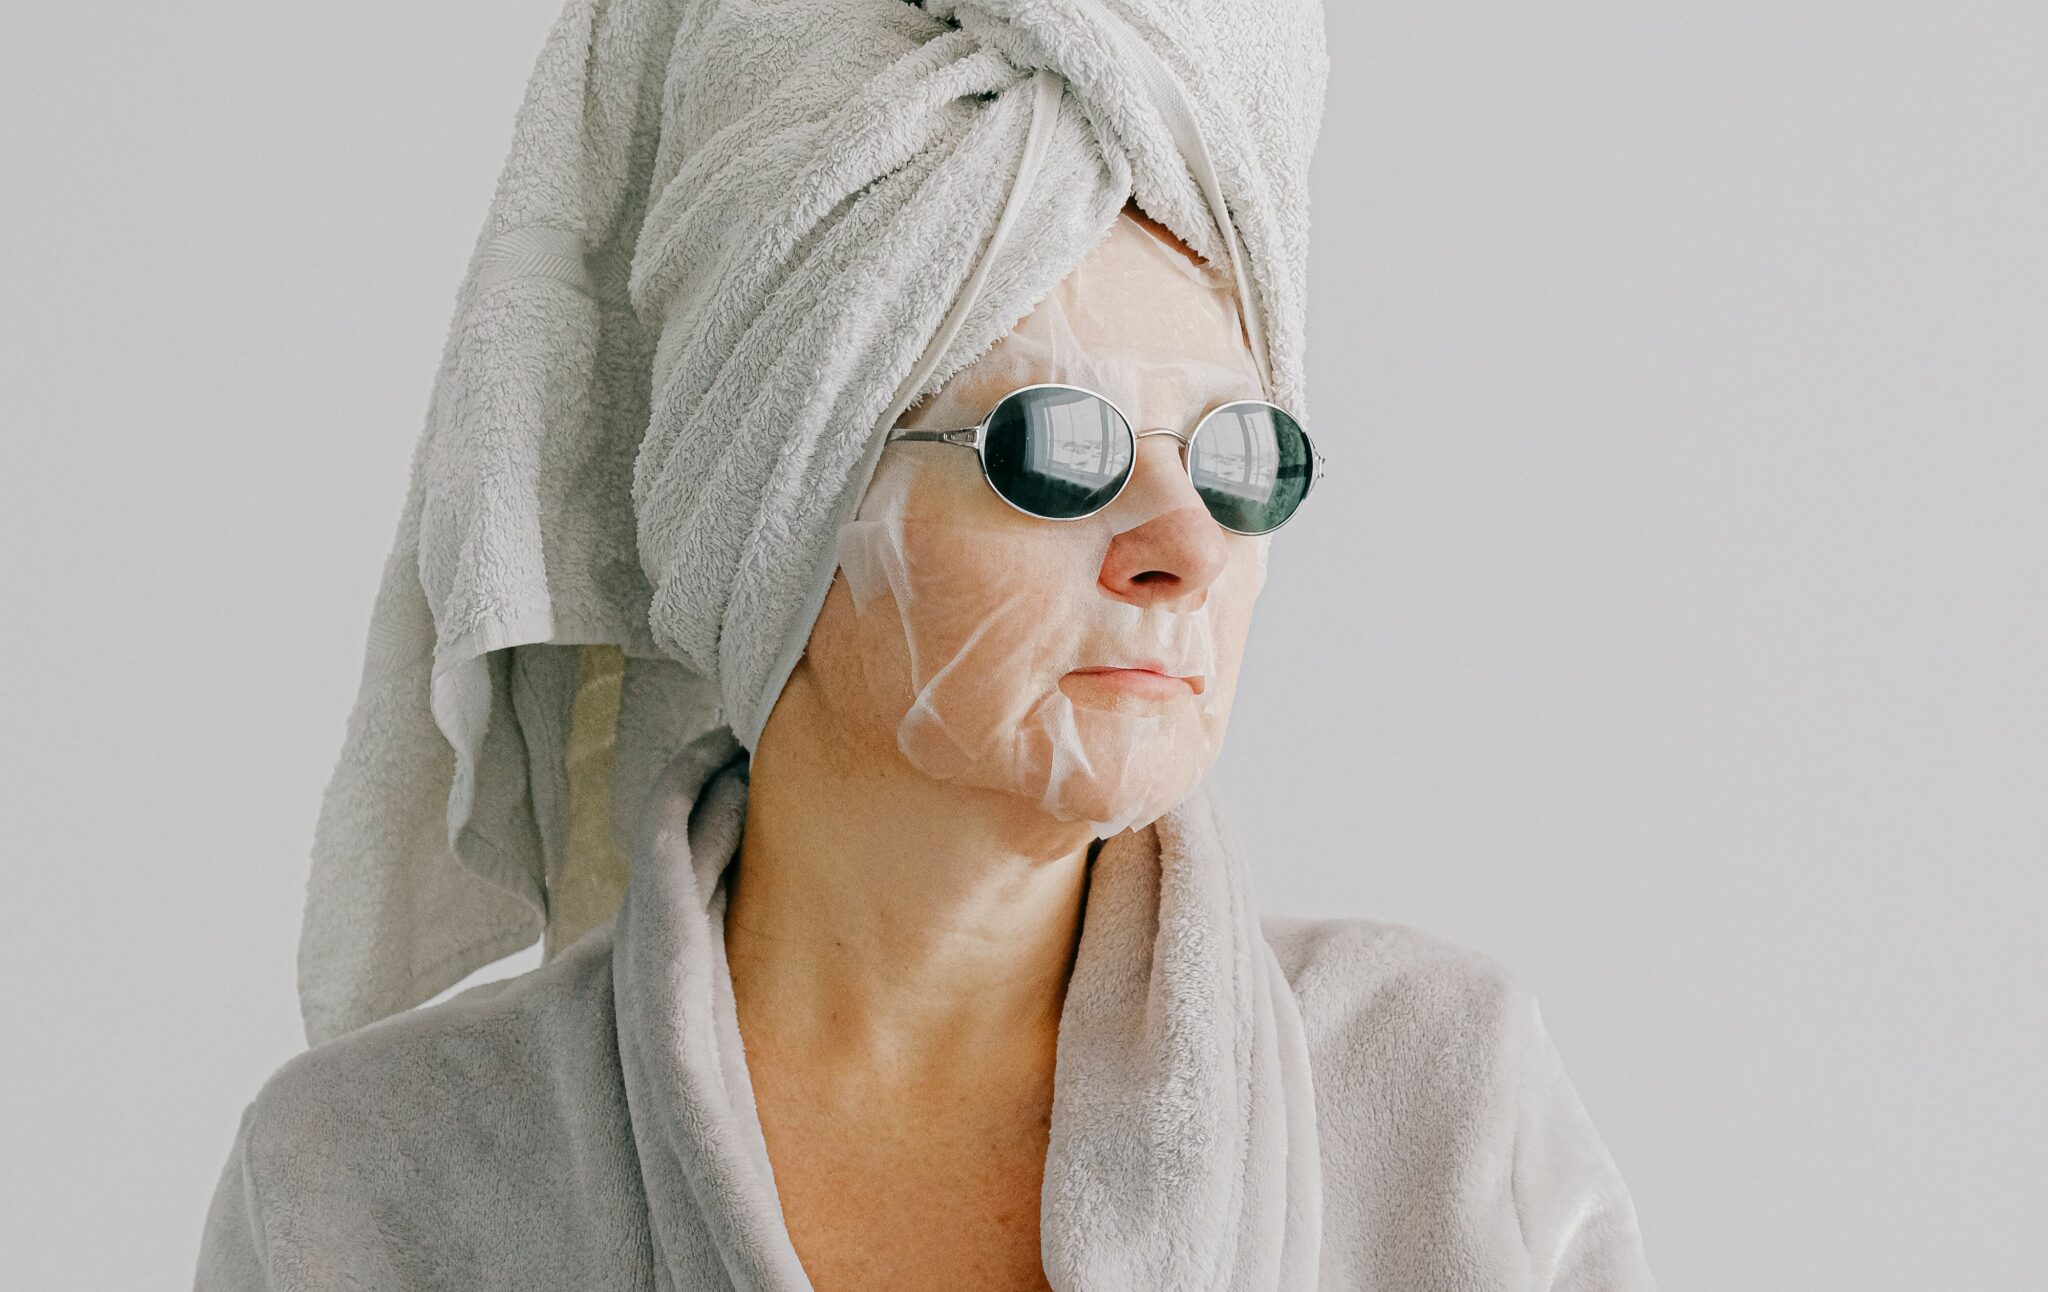 With a towel wrapped on her head, face mask and sunglasses on, an older woman stares outward.